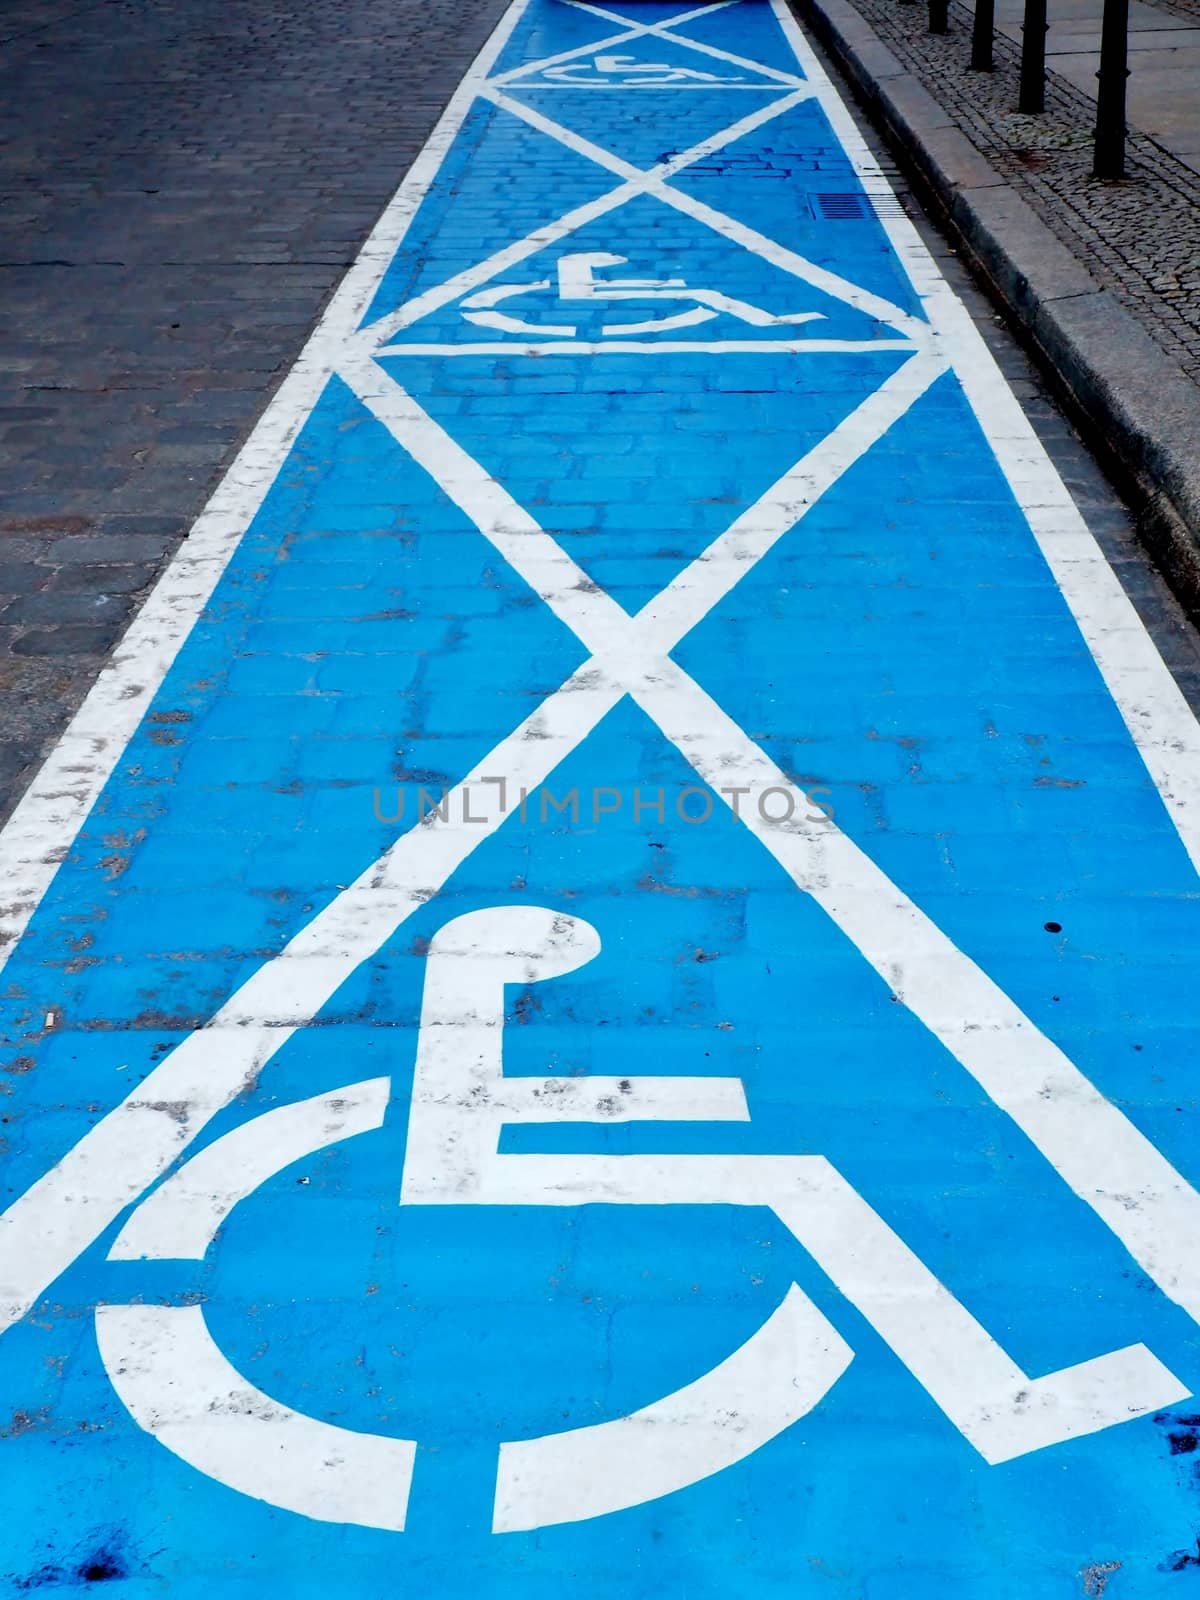 Three parking spaces for disabled people painted on the street.